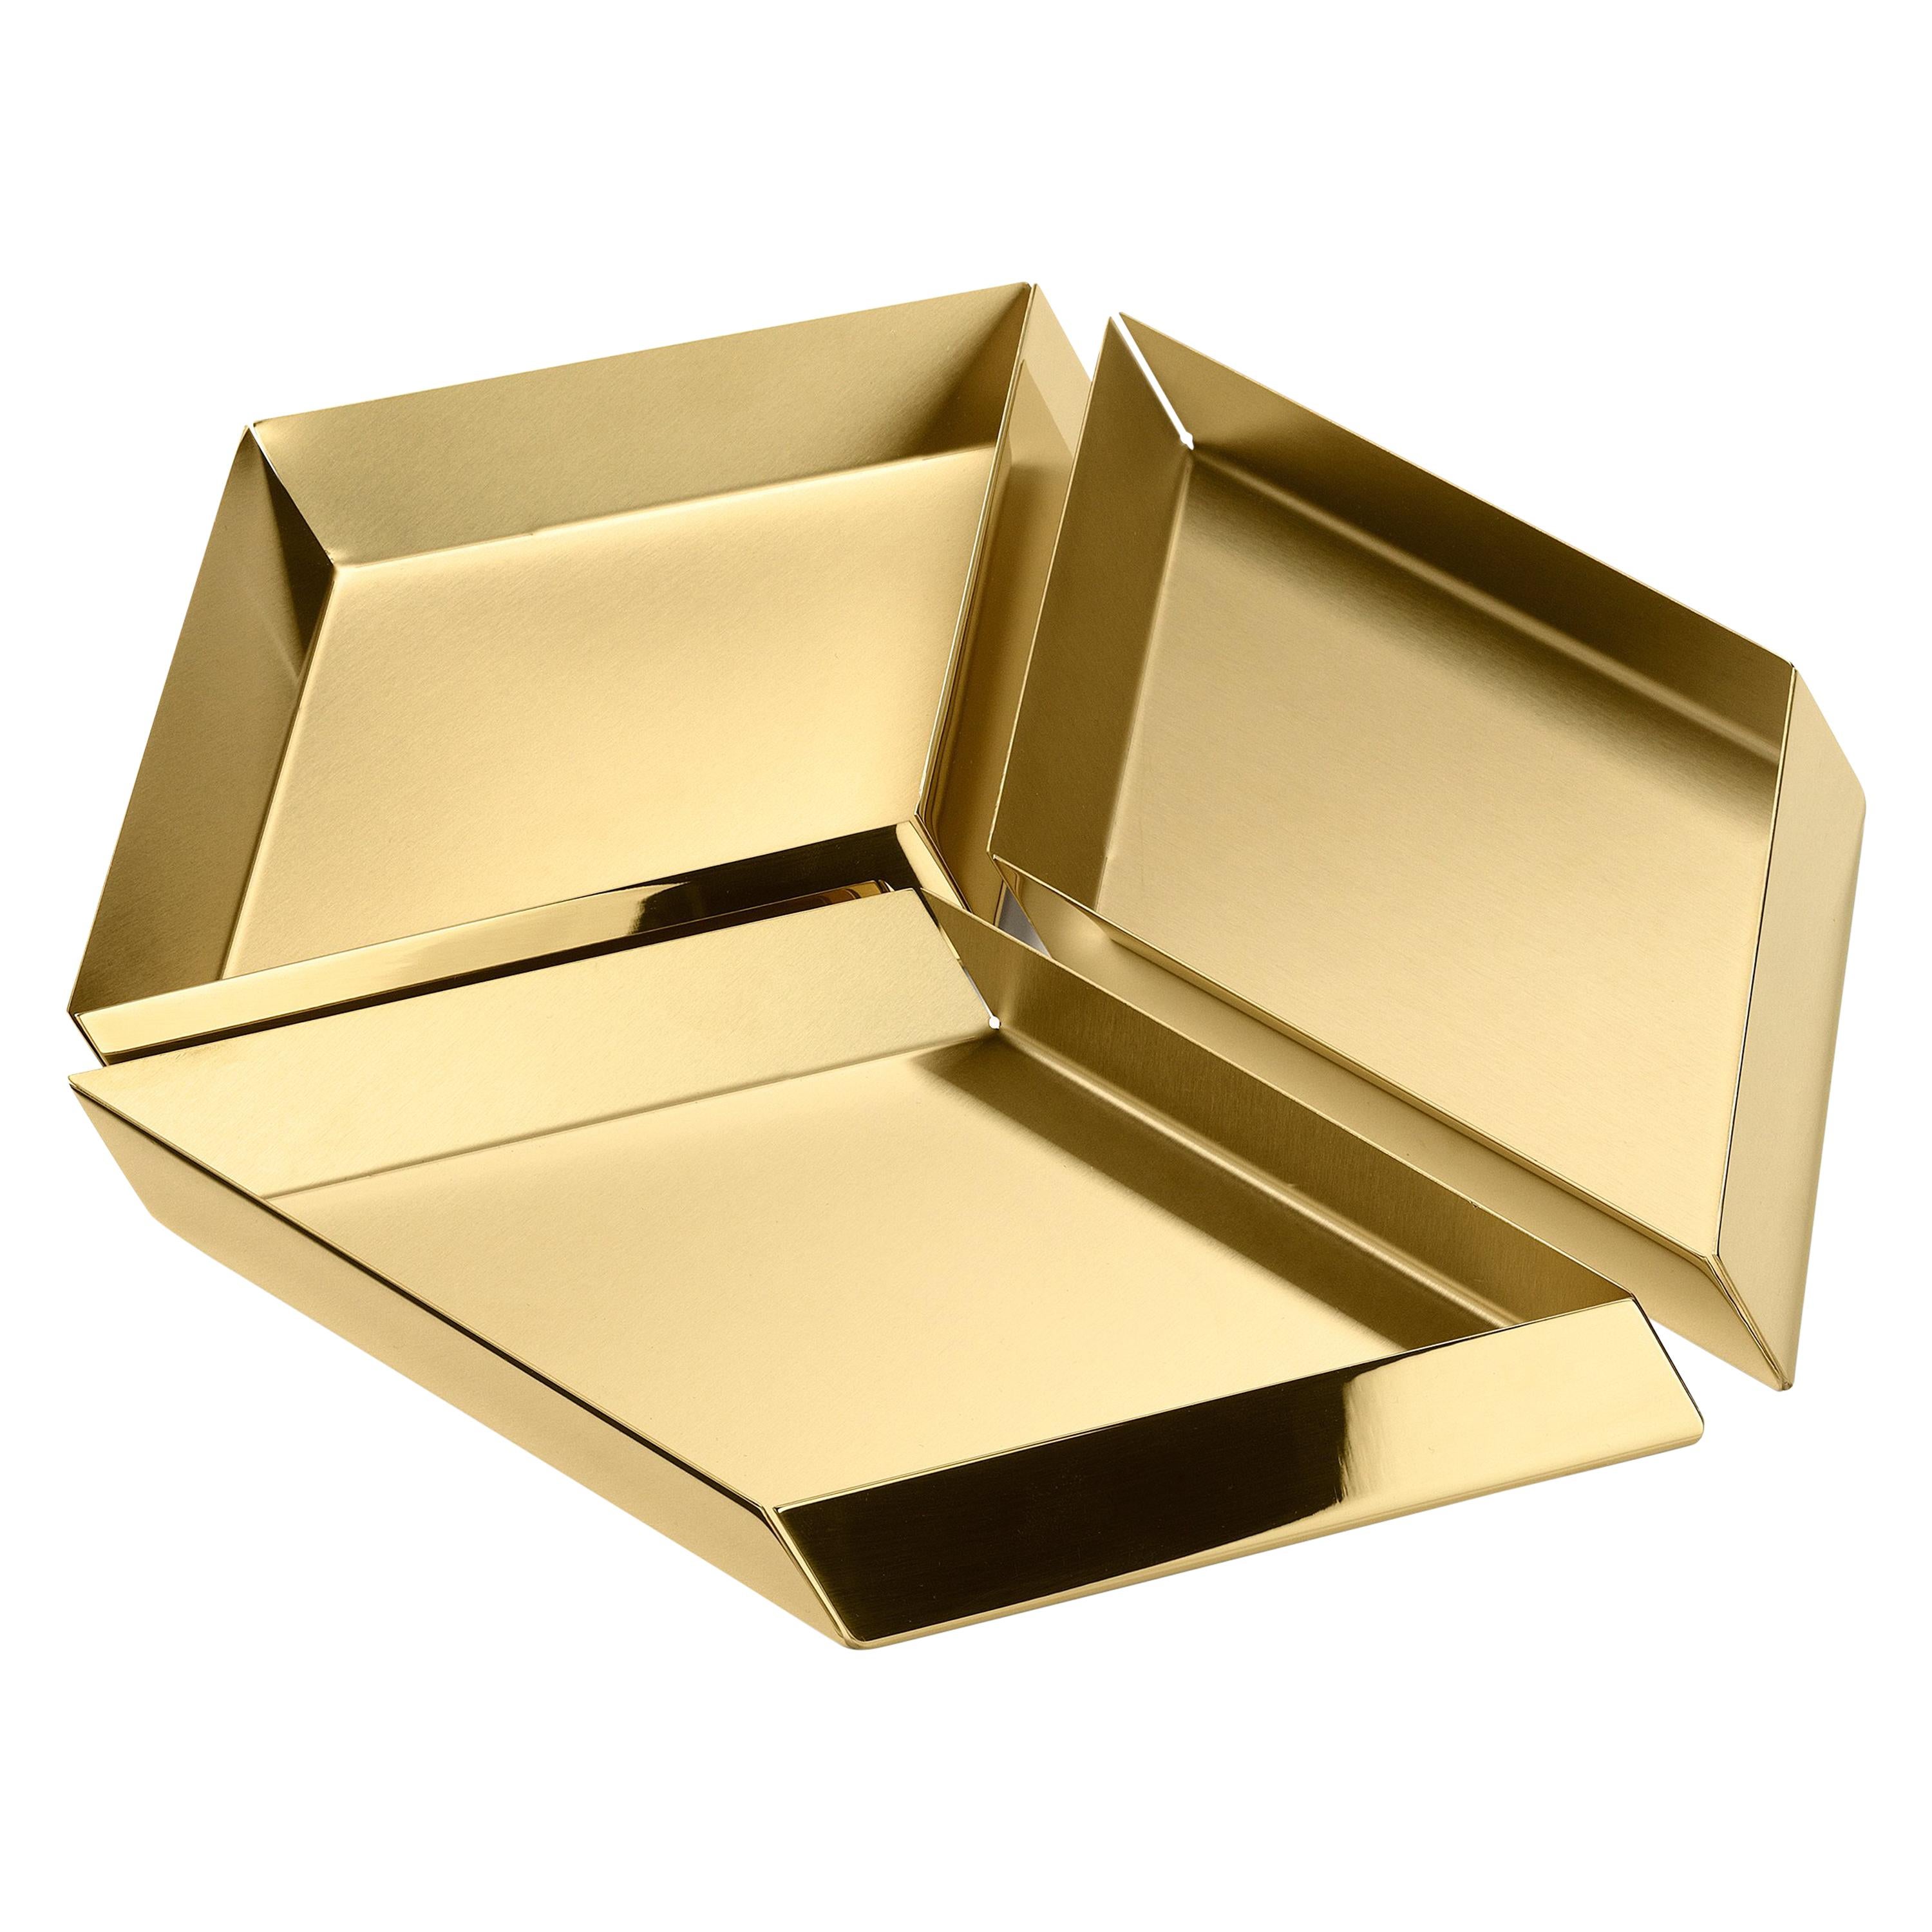 Ghidini 1961 Axonometry Large Cube Tray in Brass by Elisa Giovanni